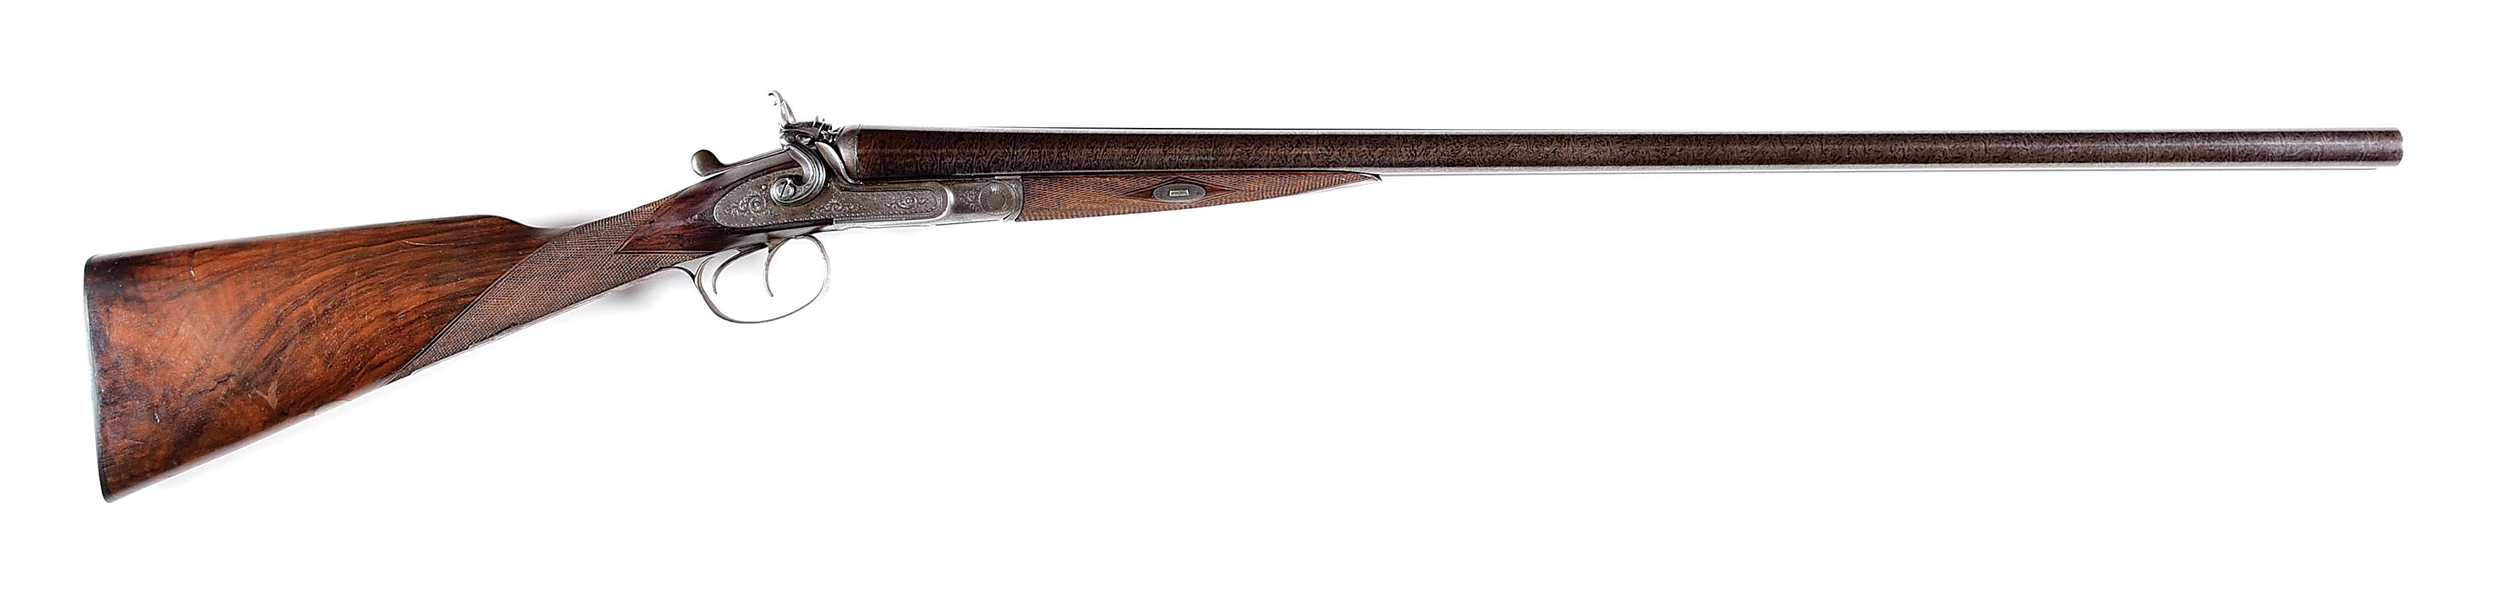 (A) W&C SCOTT & SON 12 GAUGE SIDE BY SIDE SHOTGUN WITH 28 GAUGE CHAMBER SLEEVES.